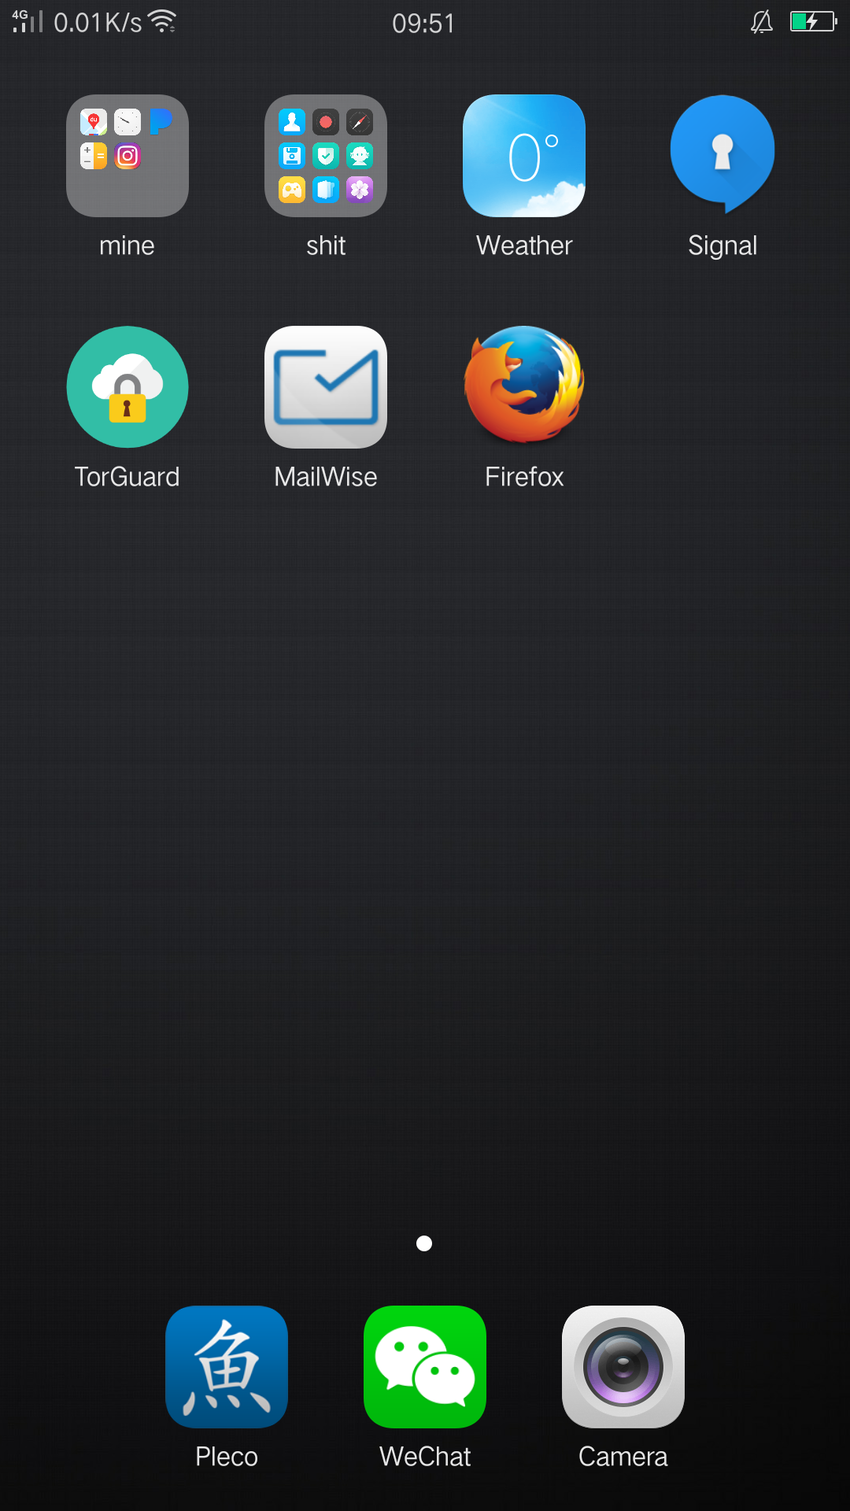 I can't hide apps, but I can put them in a folder, at least.